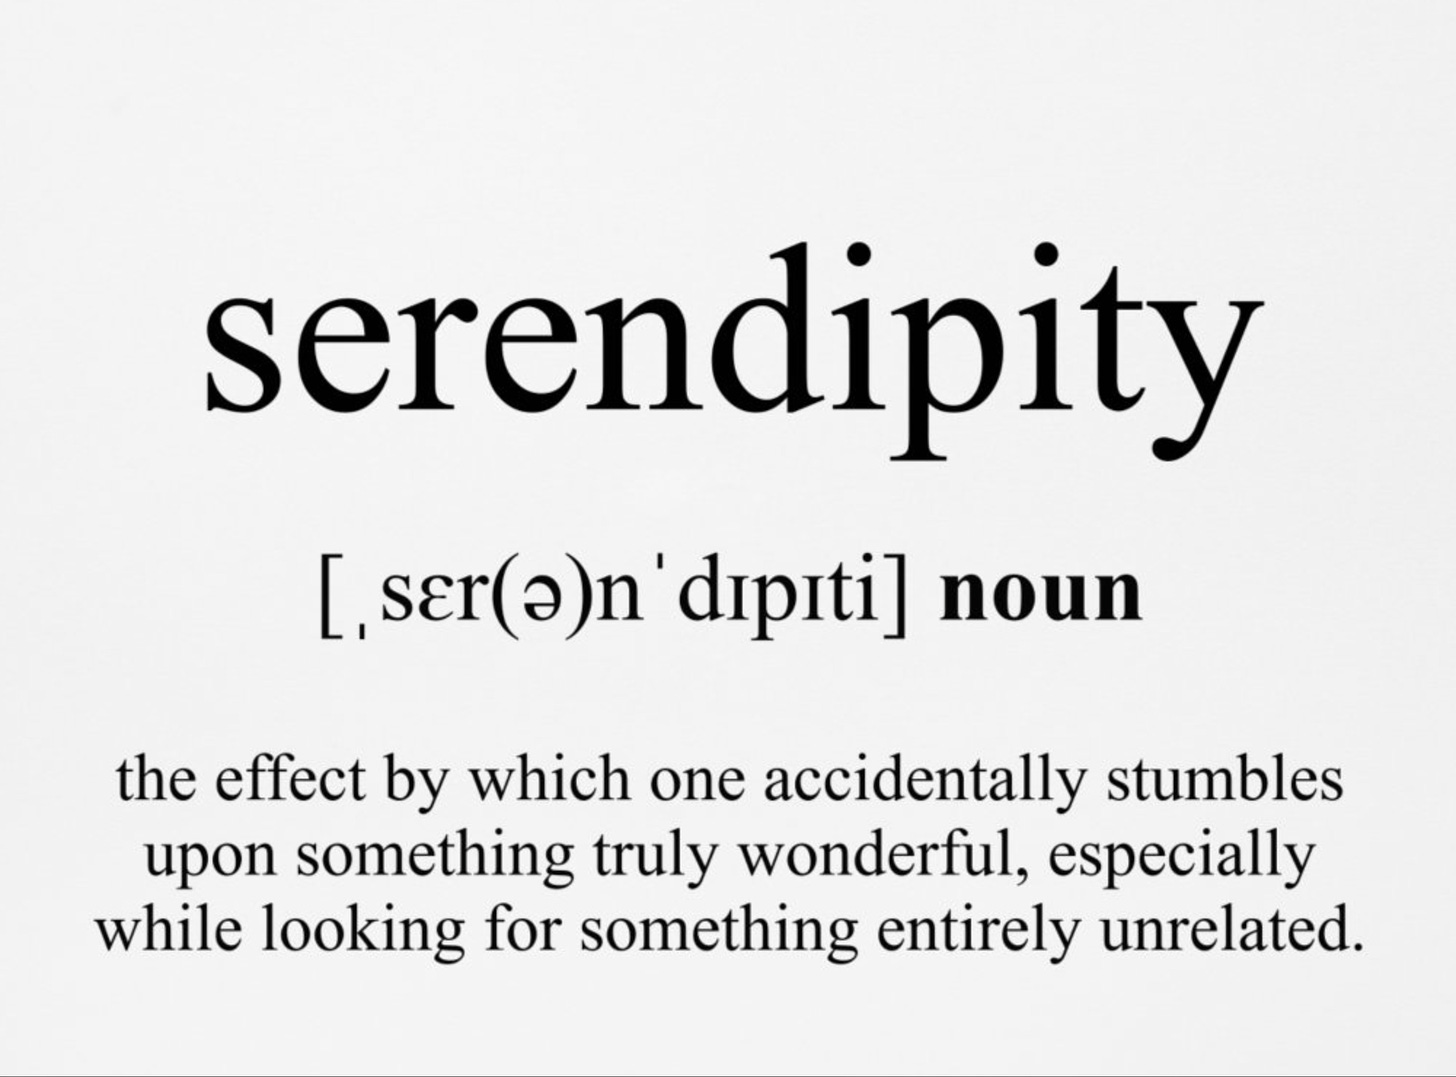 serendipity (noun): the effect by which one accidentally stumbles upon something truly wonderful, especially while looking for something entirely unrelated.